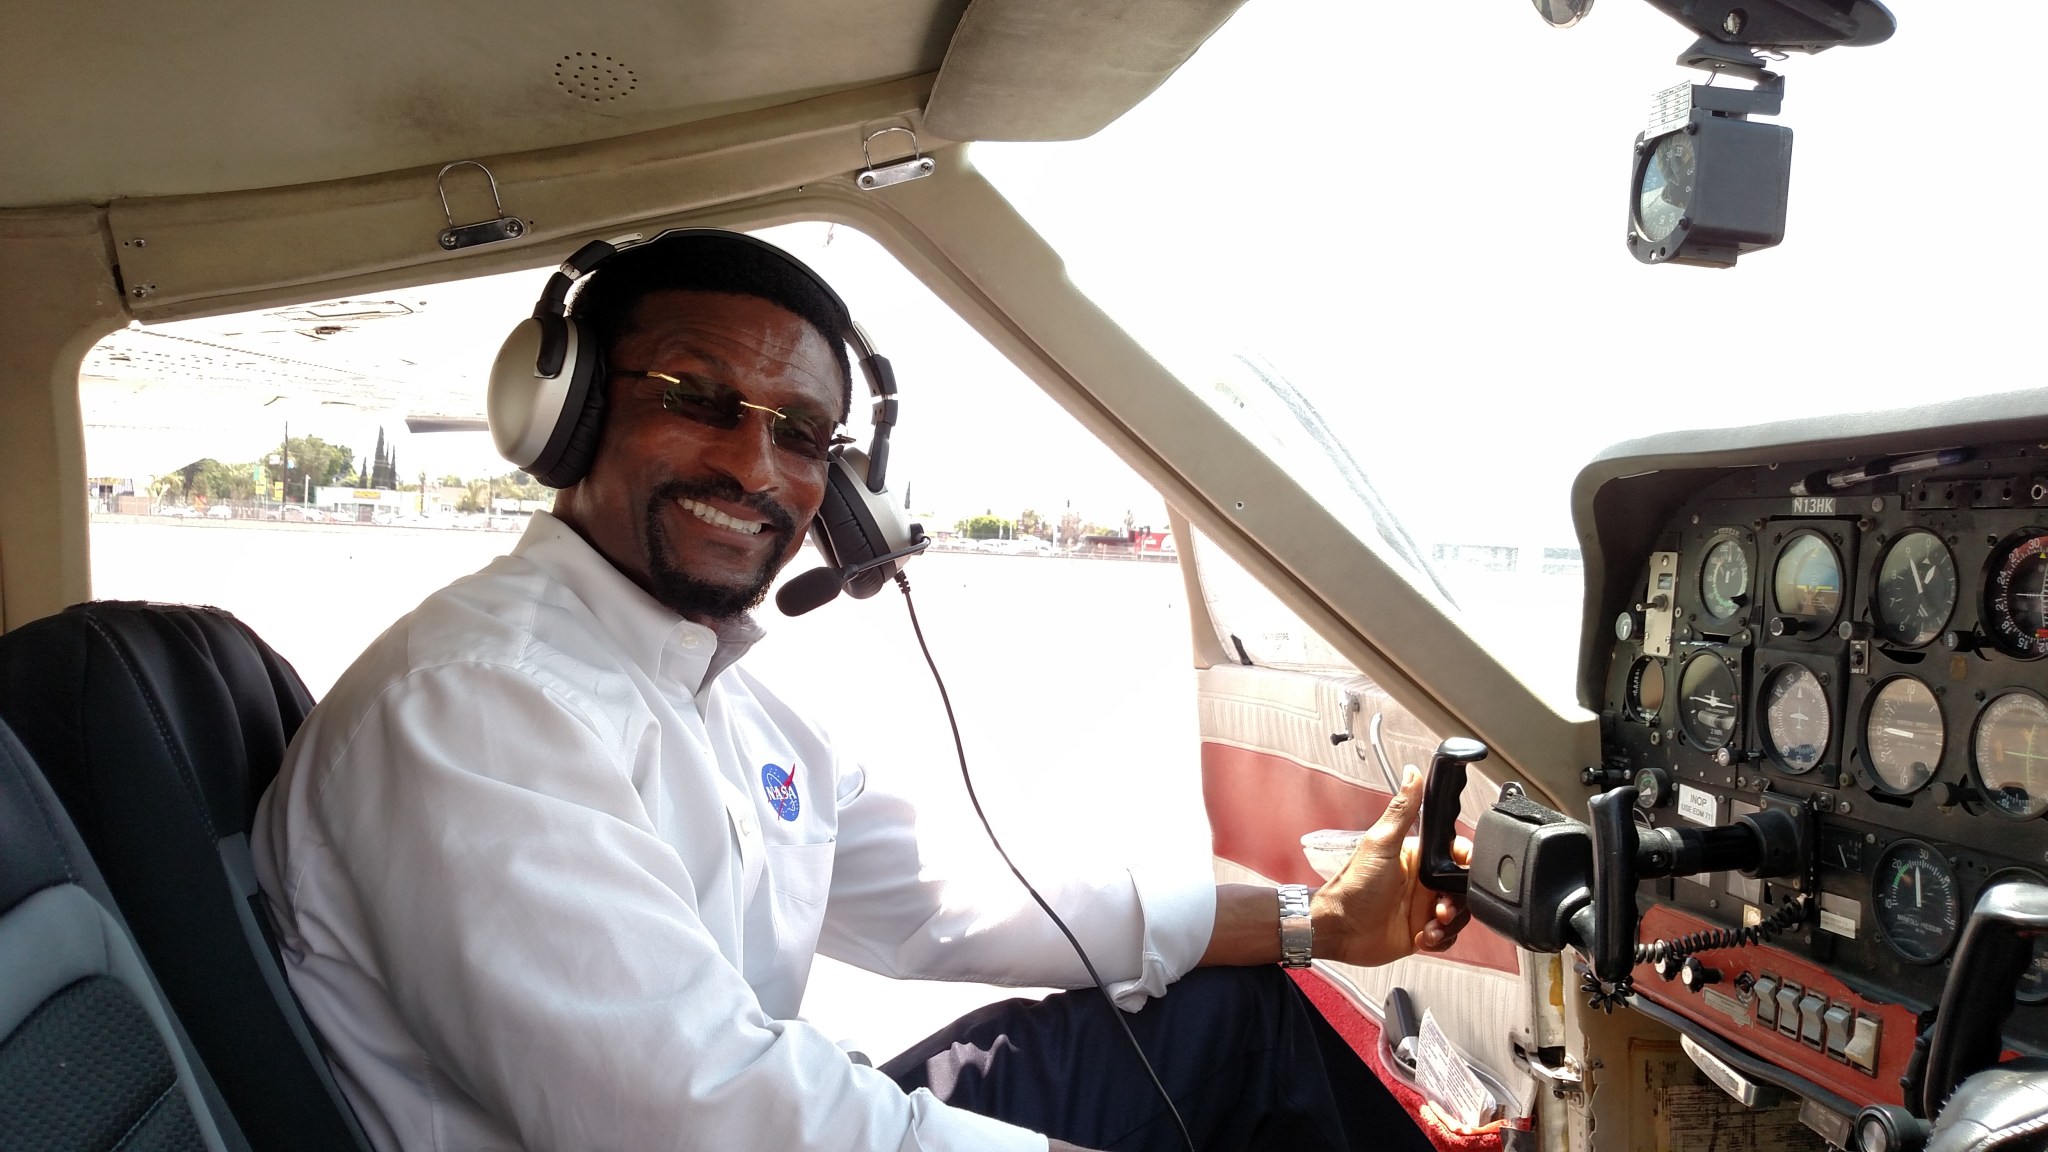 Moses Adoko, a man with short, curly black hair and beard, smiles and sits in a small airplane cockpit. He wears a headset, a white shirt with the NASA logo, and glasses. The plane door is open, showing outlines of trees and buildings.